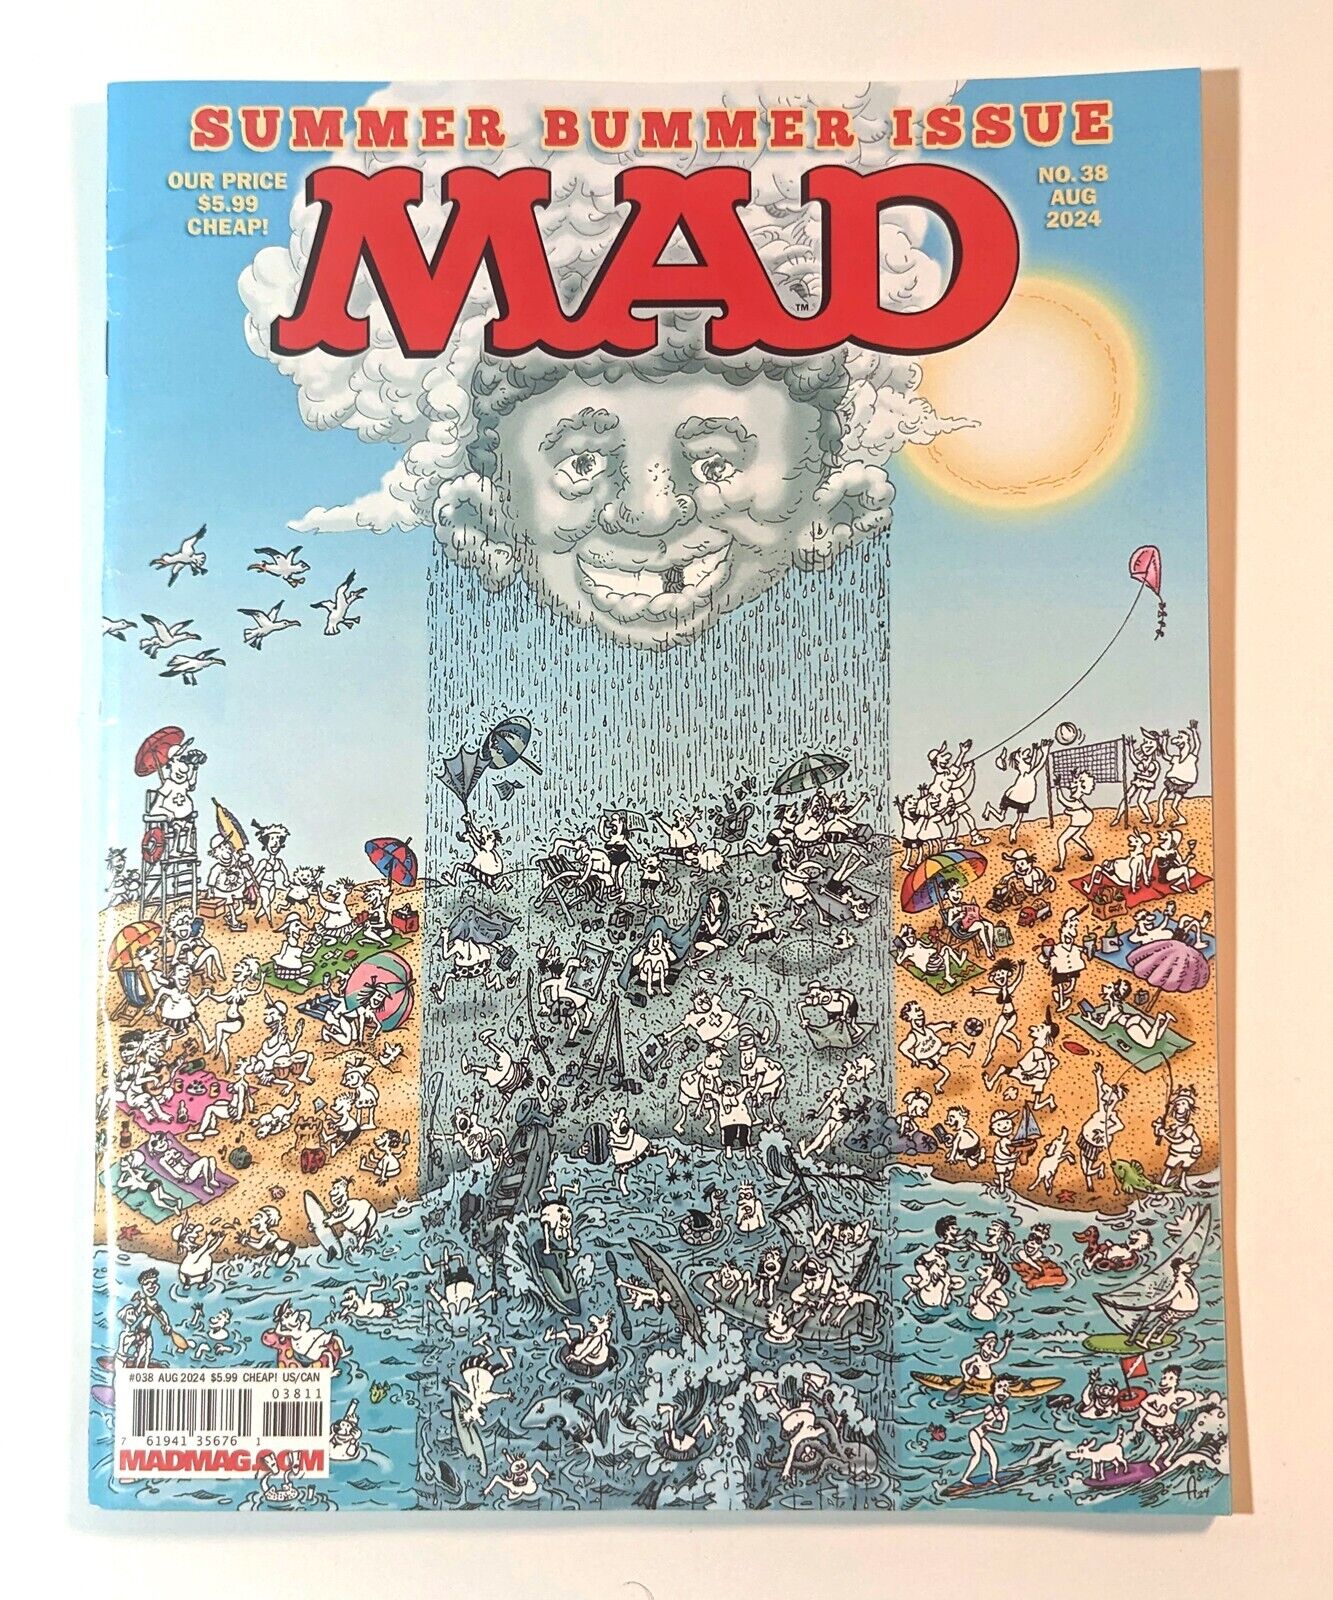 MAD MAGAZINE #38 Aug 2024 Summer Bummer Jaffee/Aragones Cover Ships Monday LN/NM